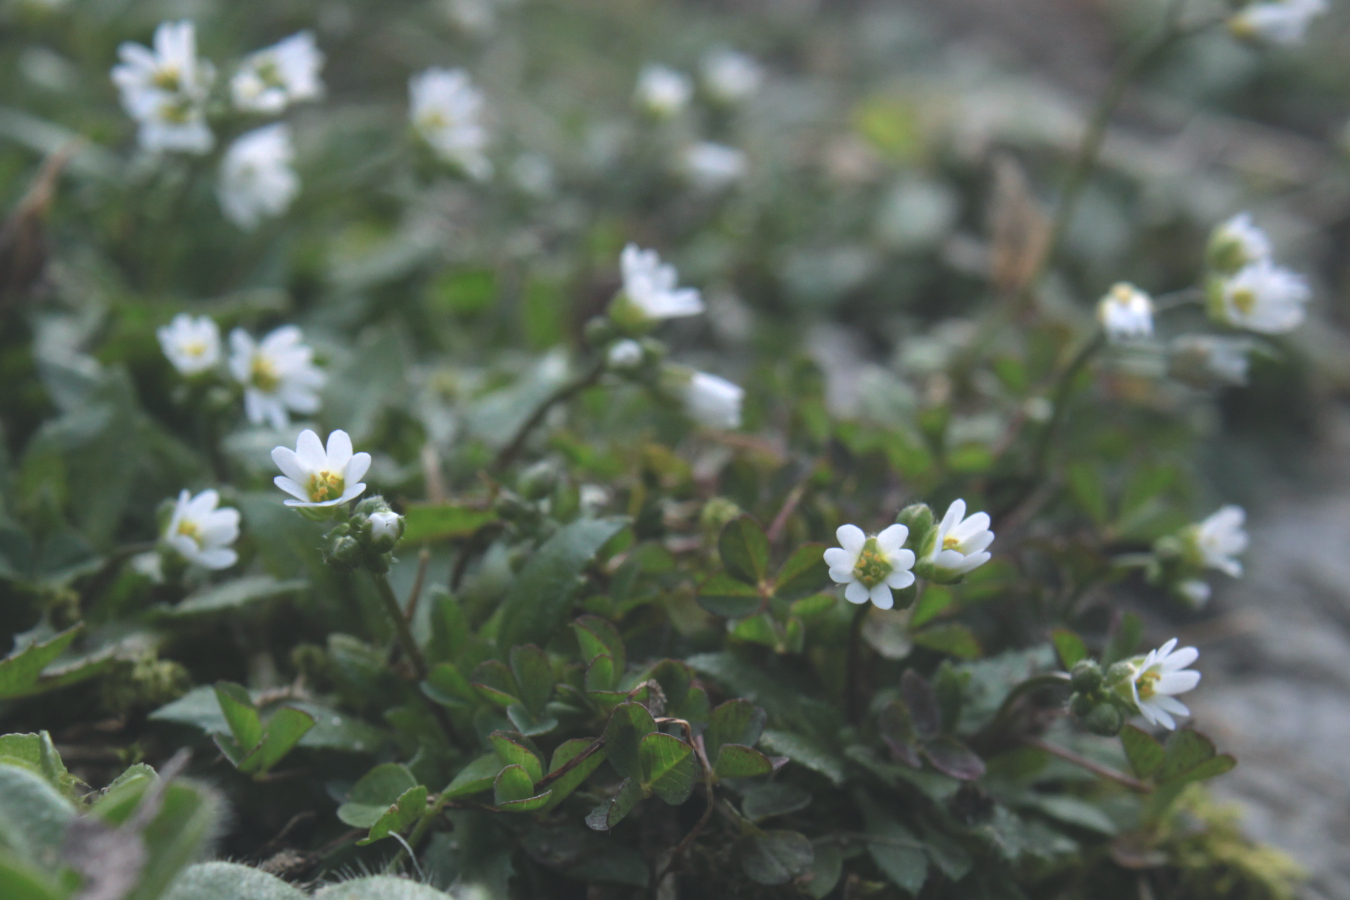 Small white flowers, three heart shaped petals on each